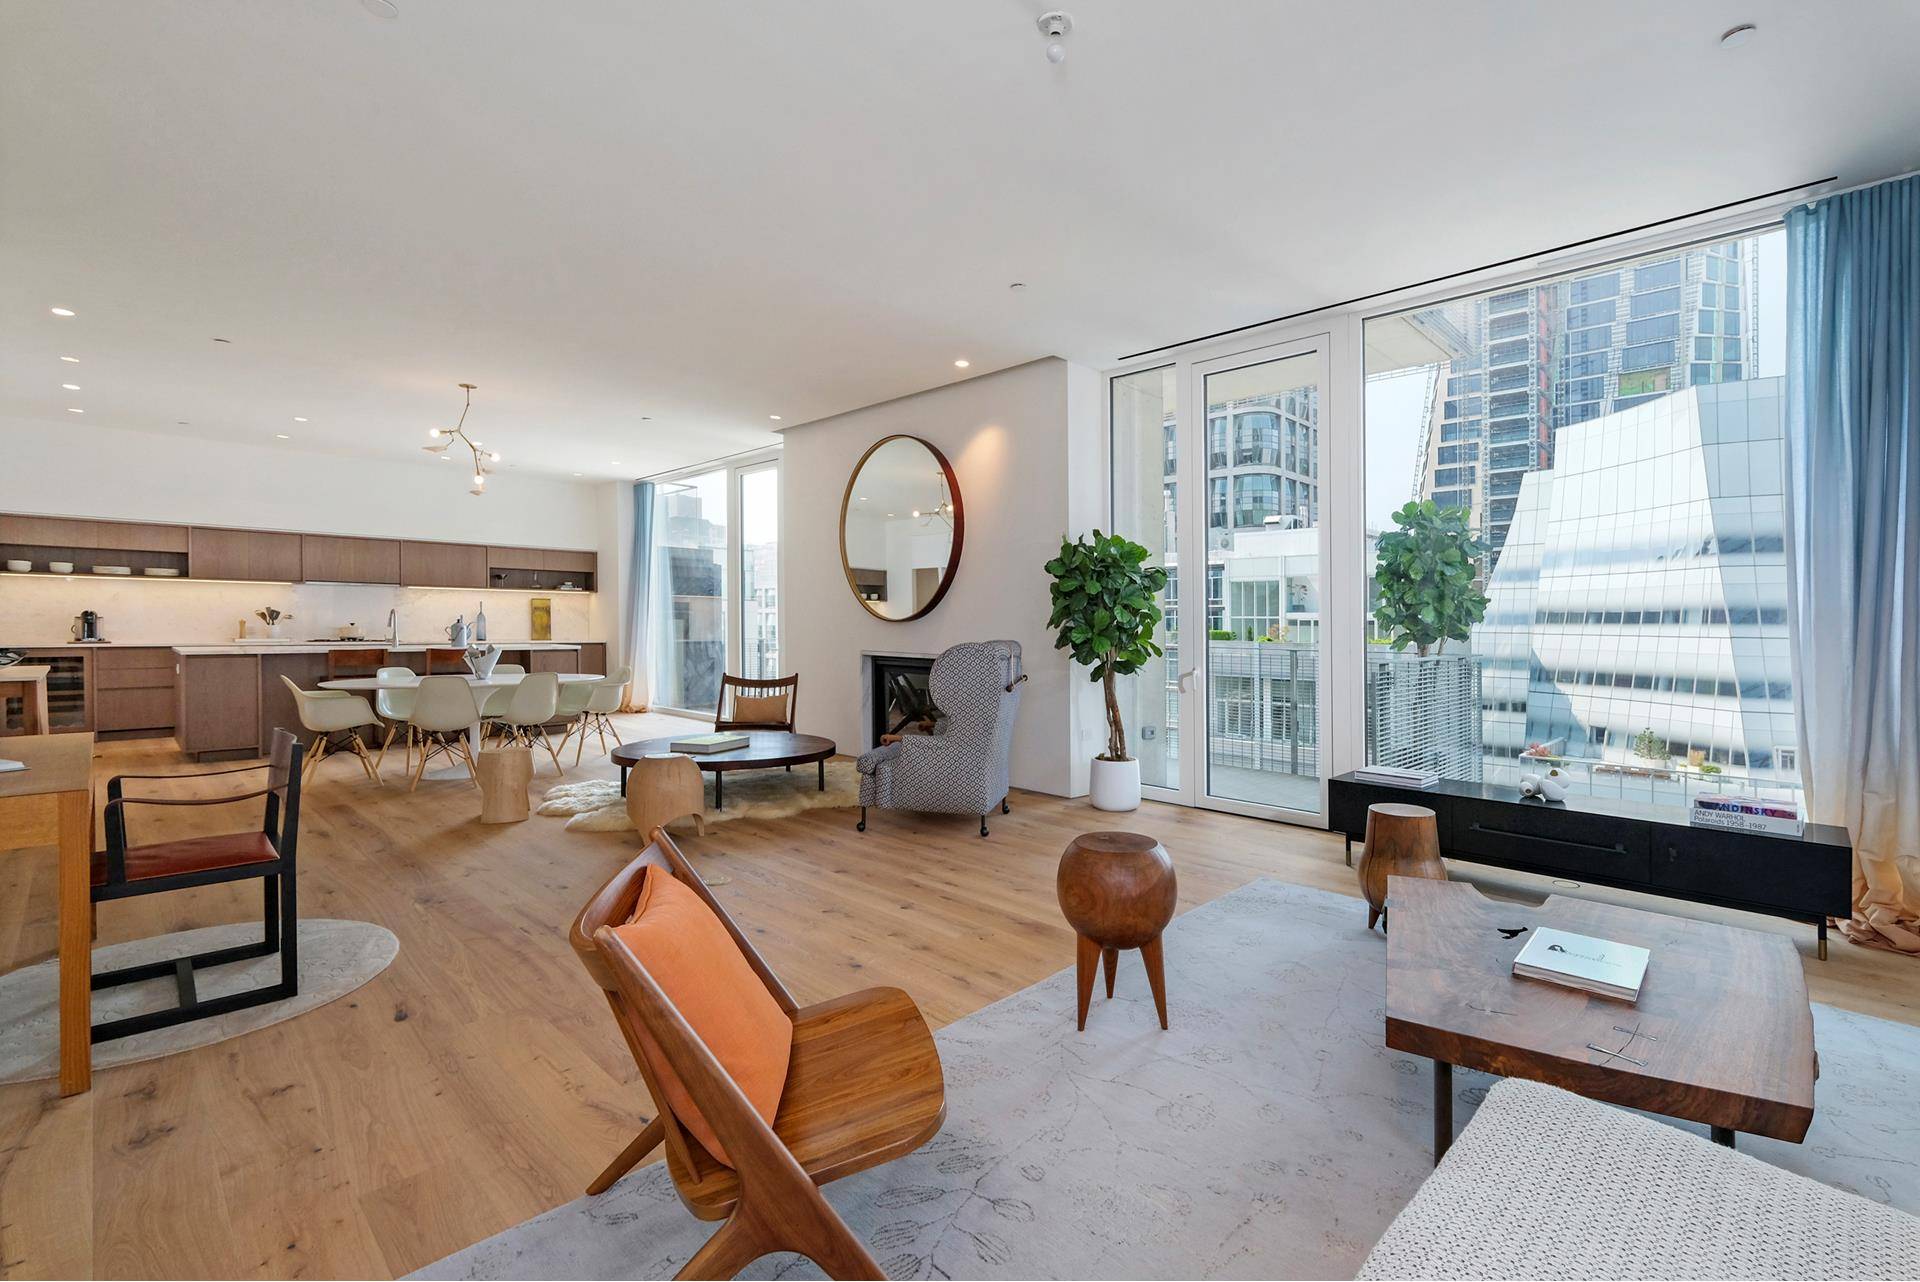 IMMEDIATE OCCUPANCY Residence 10 at 532 West 20th Street is an exquisitely crafted 2, 694 SF full floor, 3 Bedroom, 3 Full Bath and Half Bath featuring a 155 SF ...